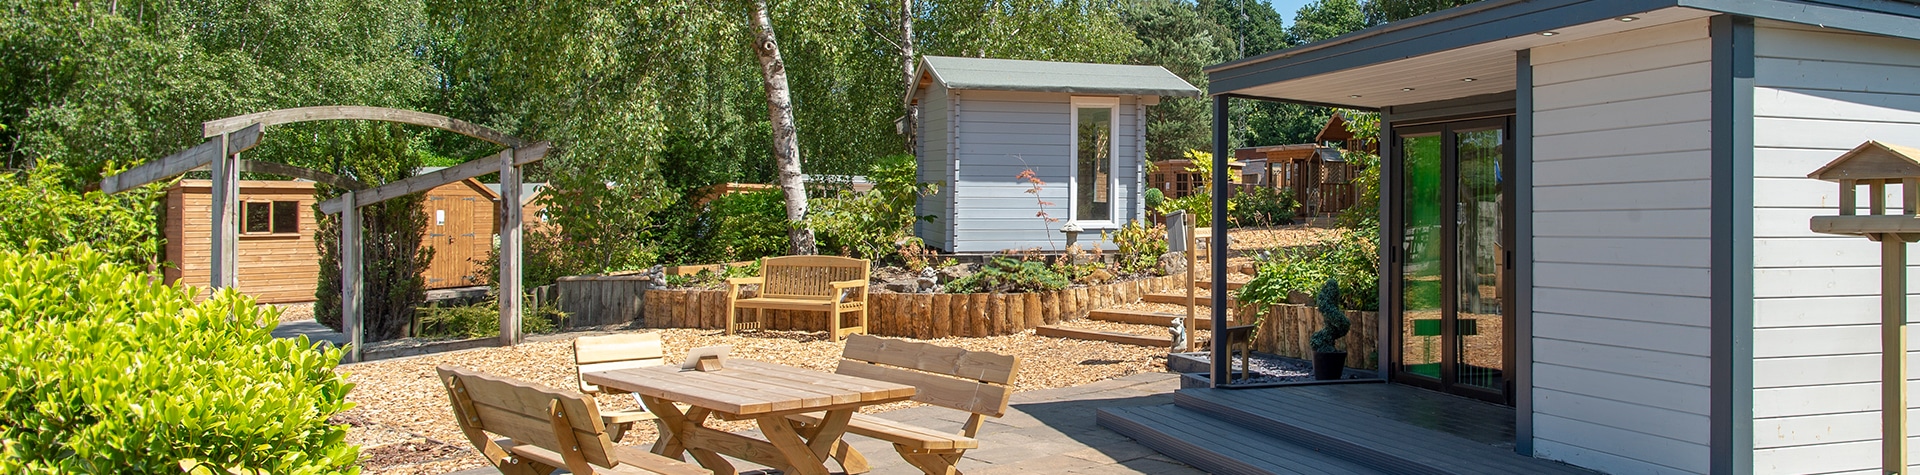 http://Sheds,%20Cabins%20and%20Summerhouses